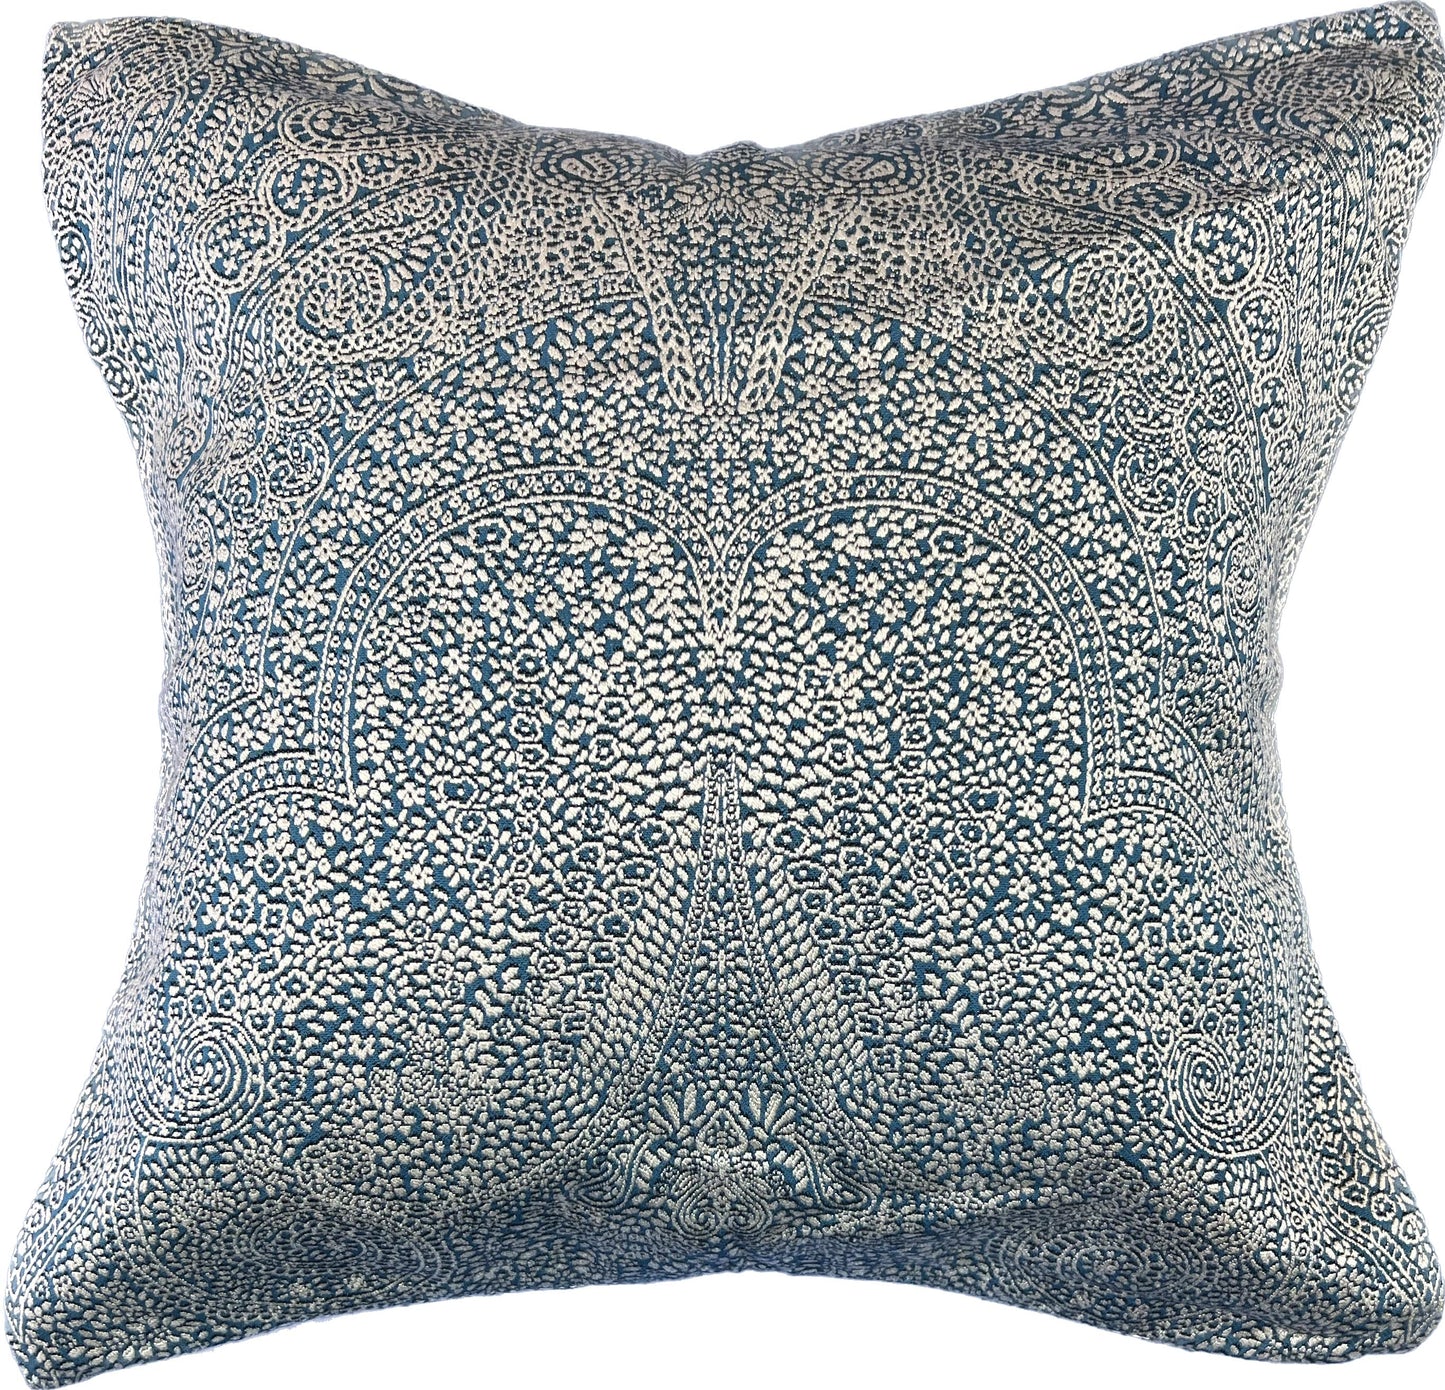 18"x18"  Paisley Pillow Cover